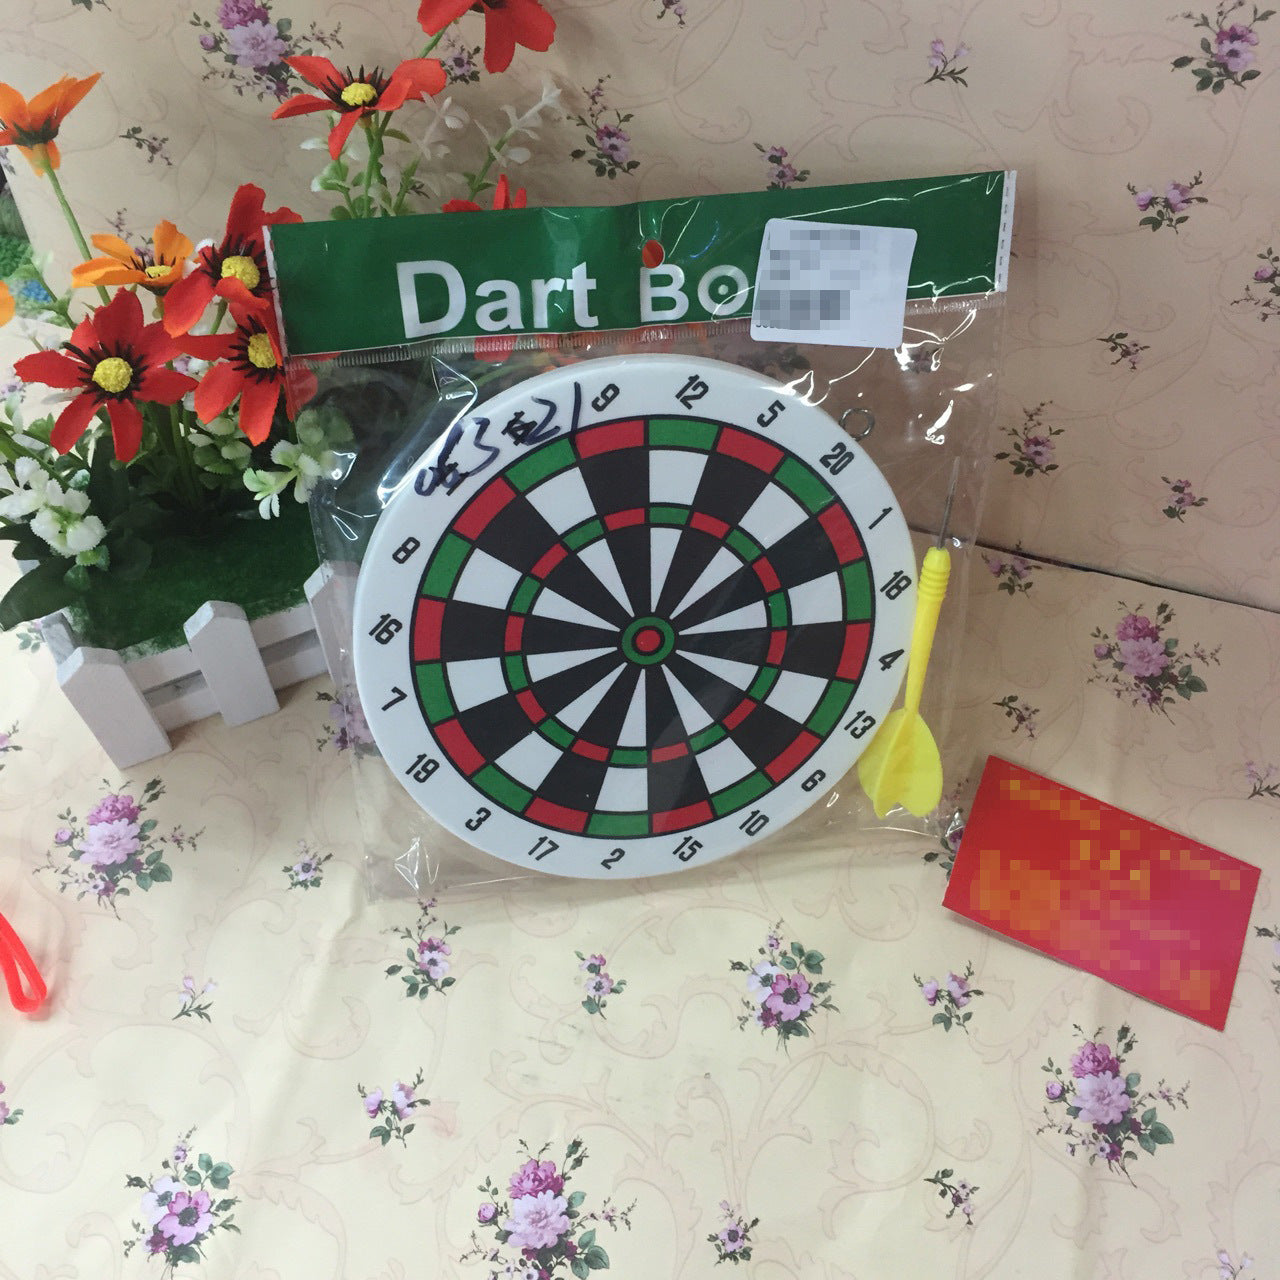 Double Sided Dart Board Game with 1 Dart